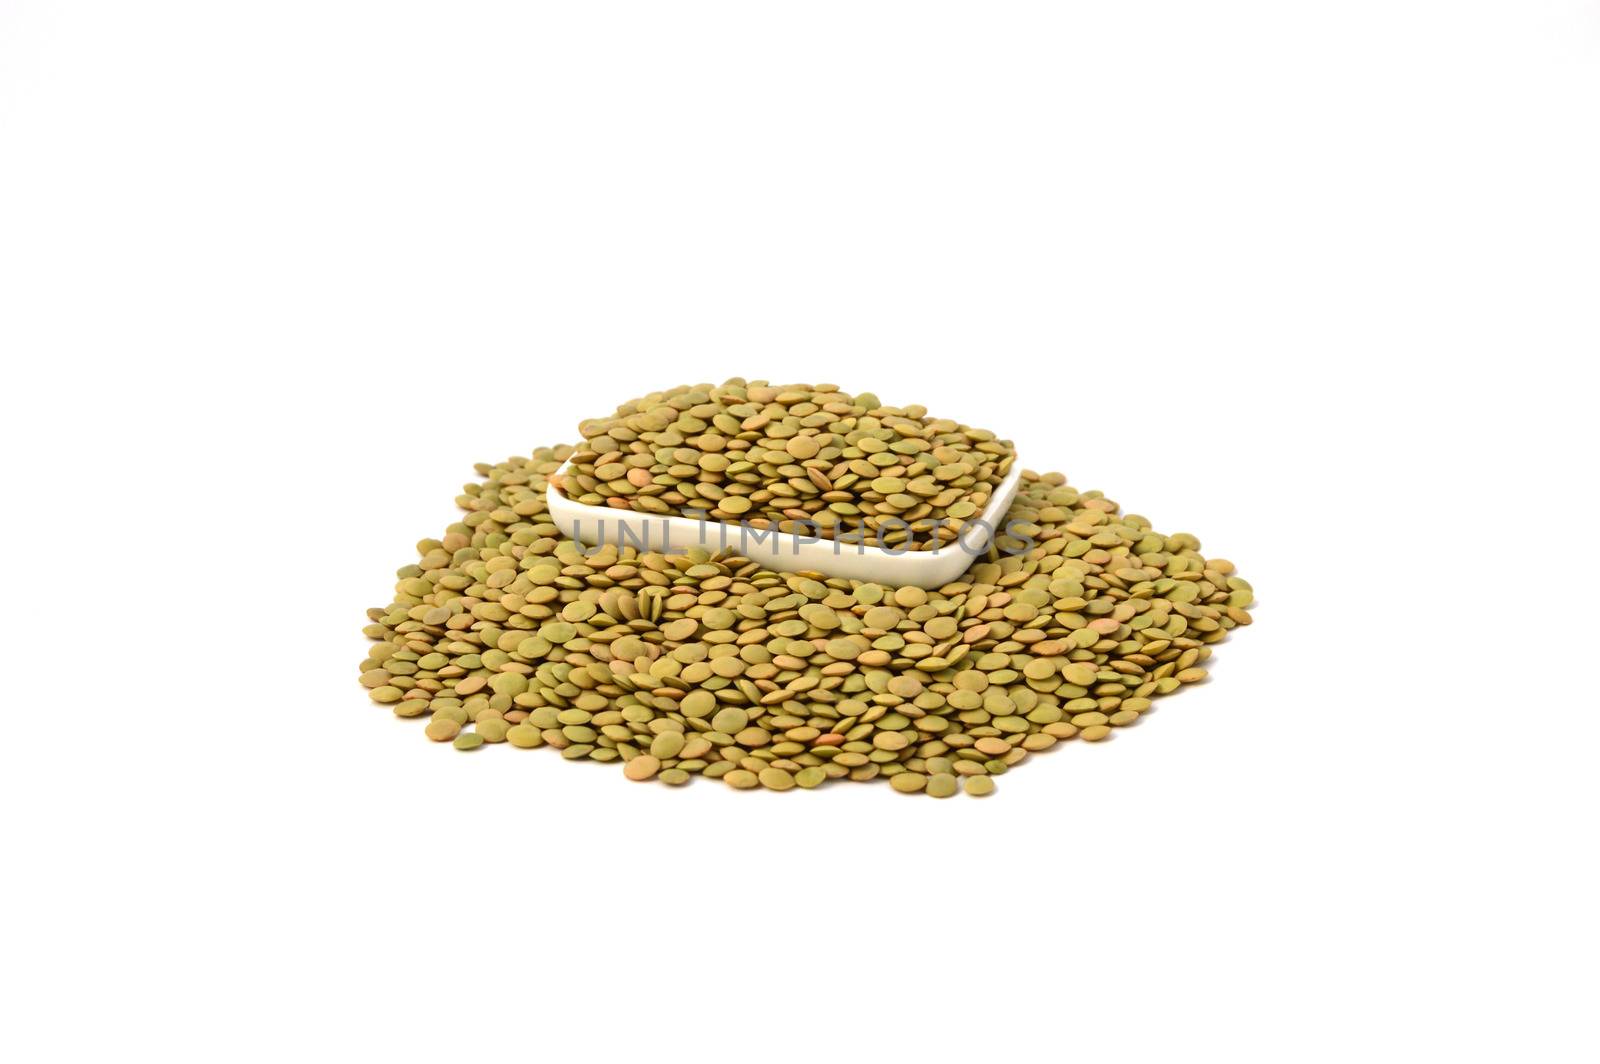 Pictures of green lentils with high nutrition by nhatipoglu